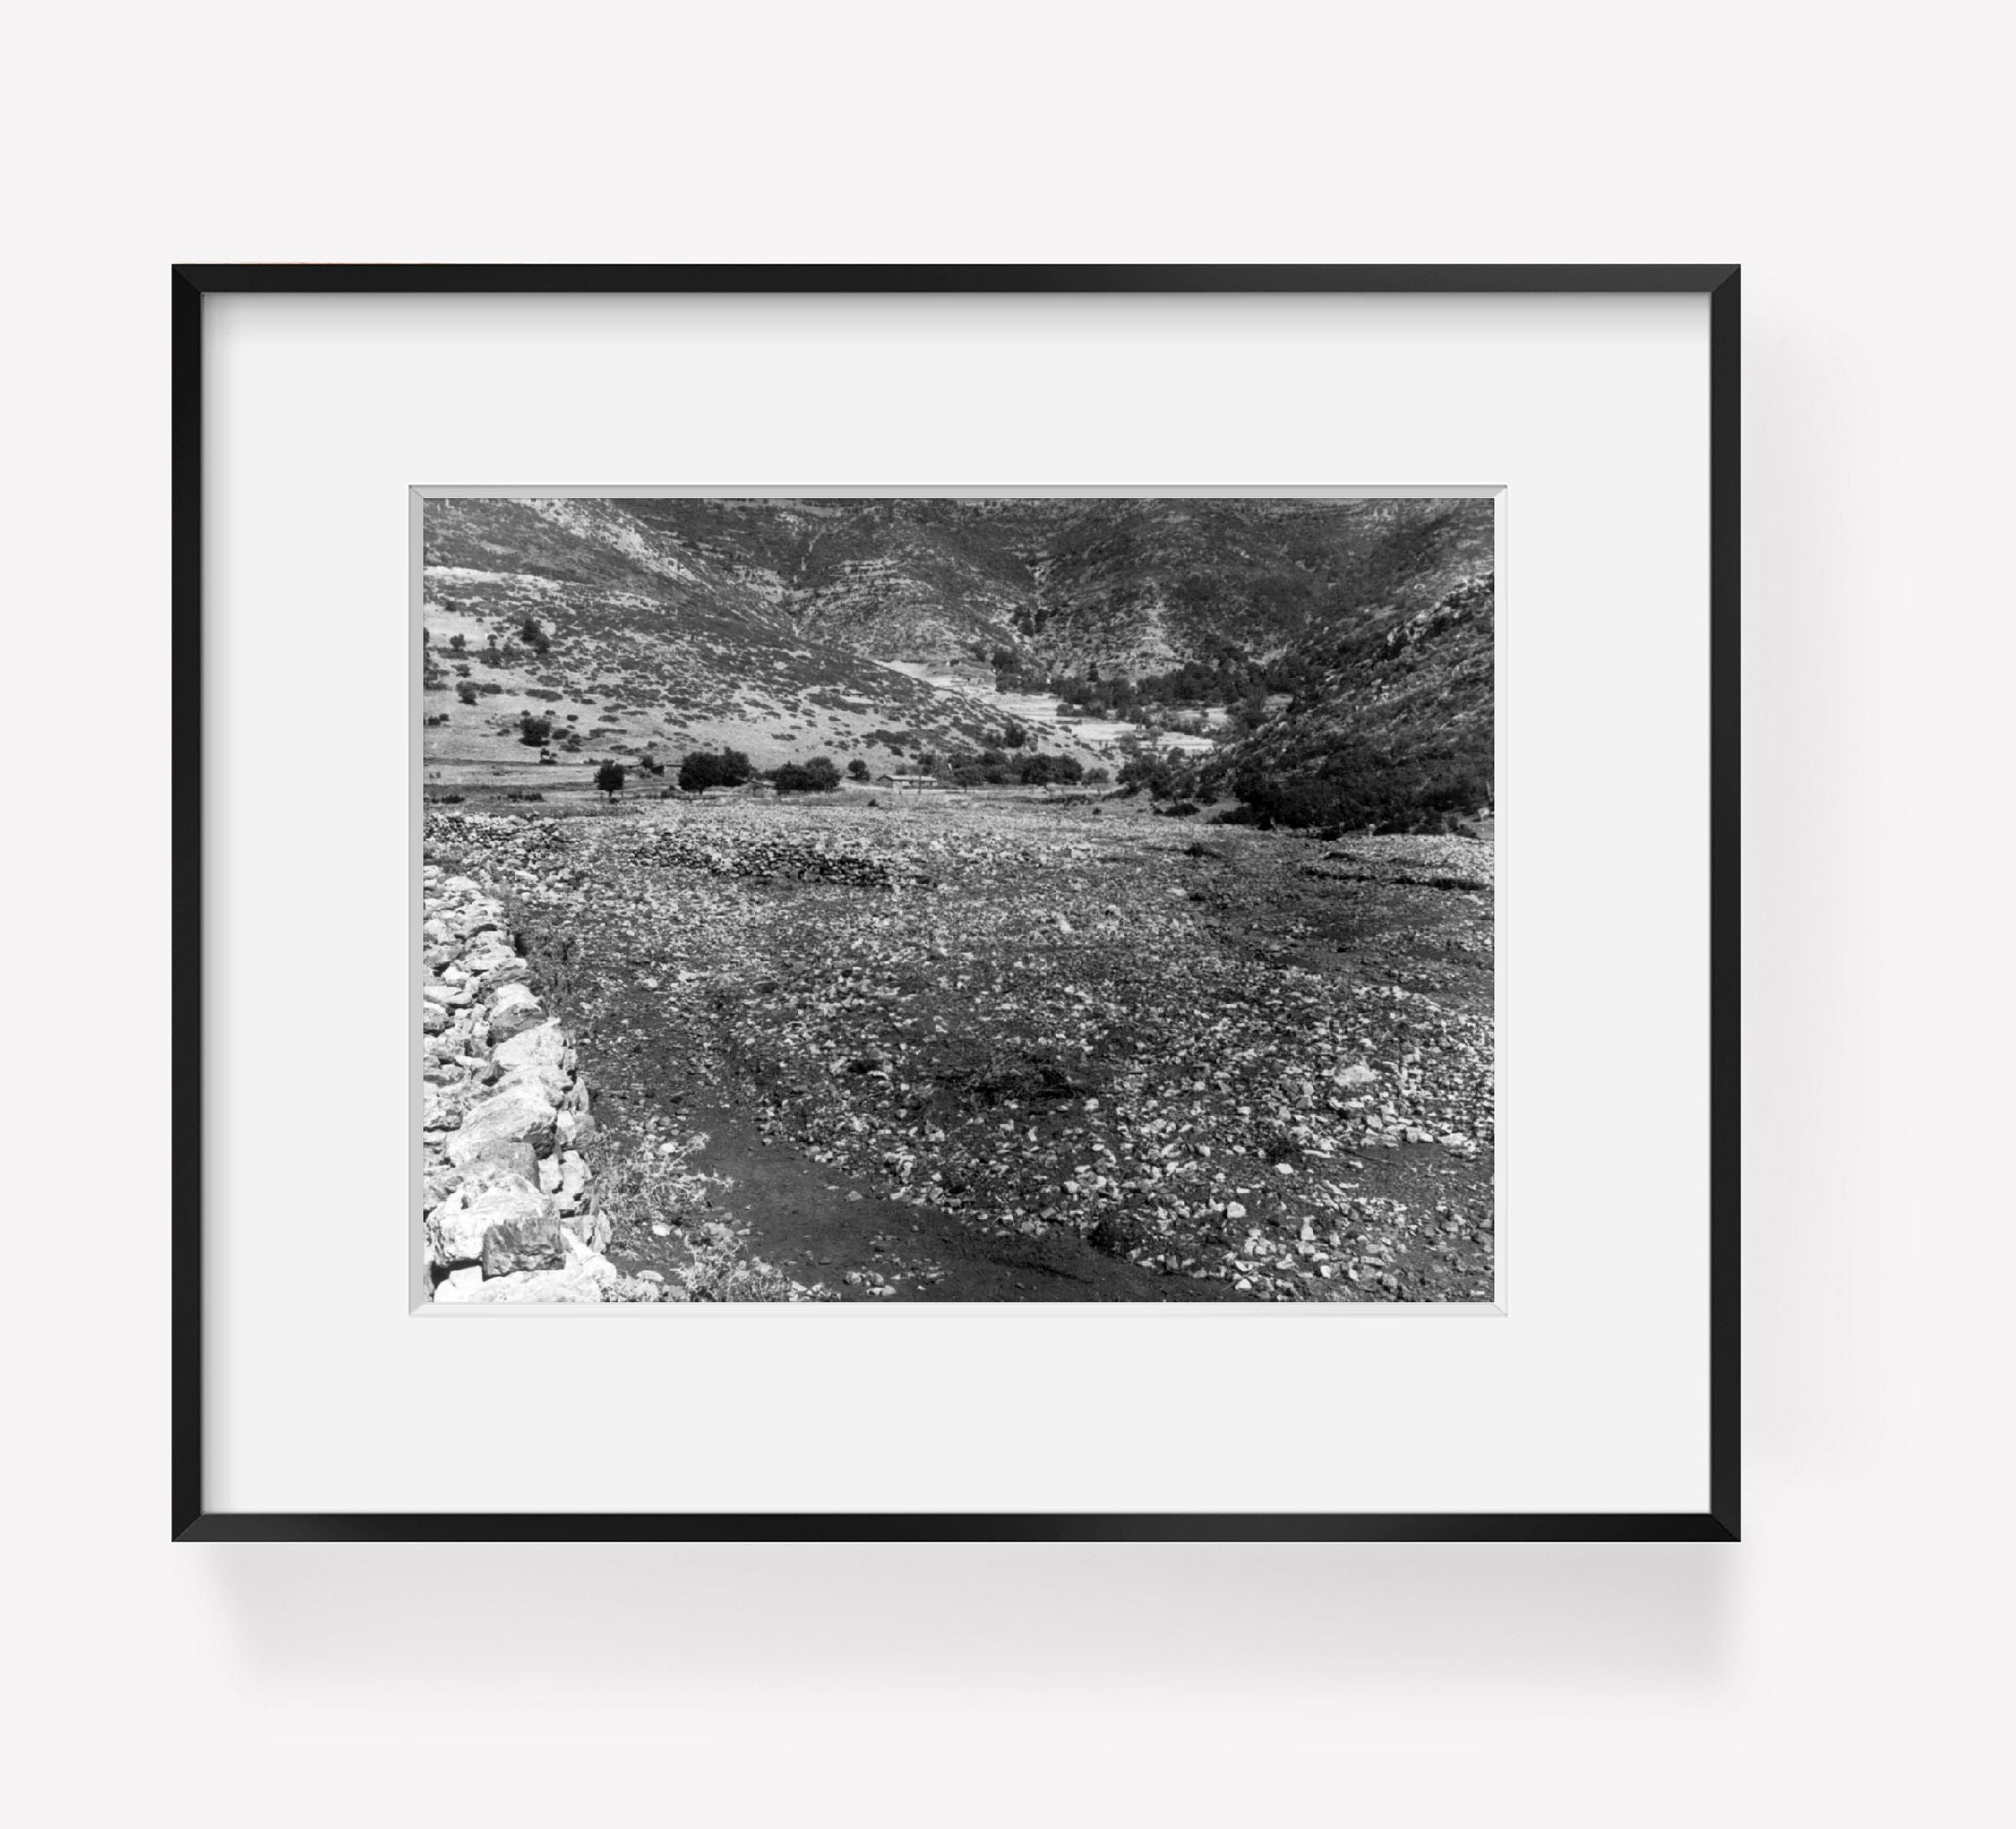 Photo: Mouth of the dry wash below village of Kandalos, Greece, 1946